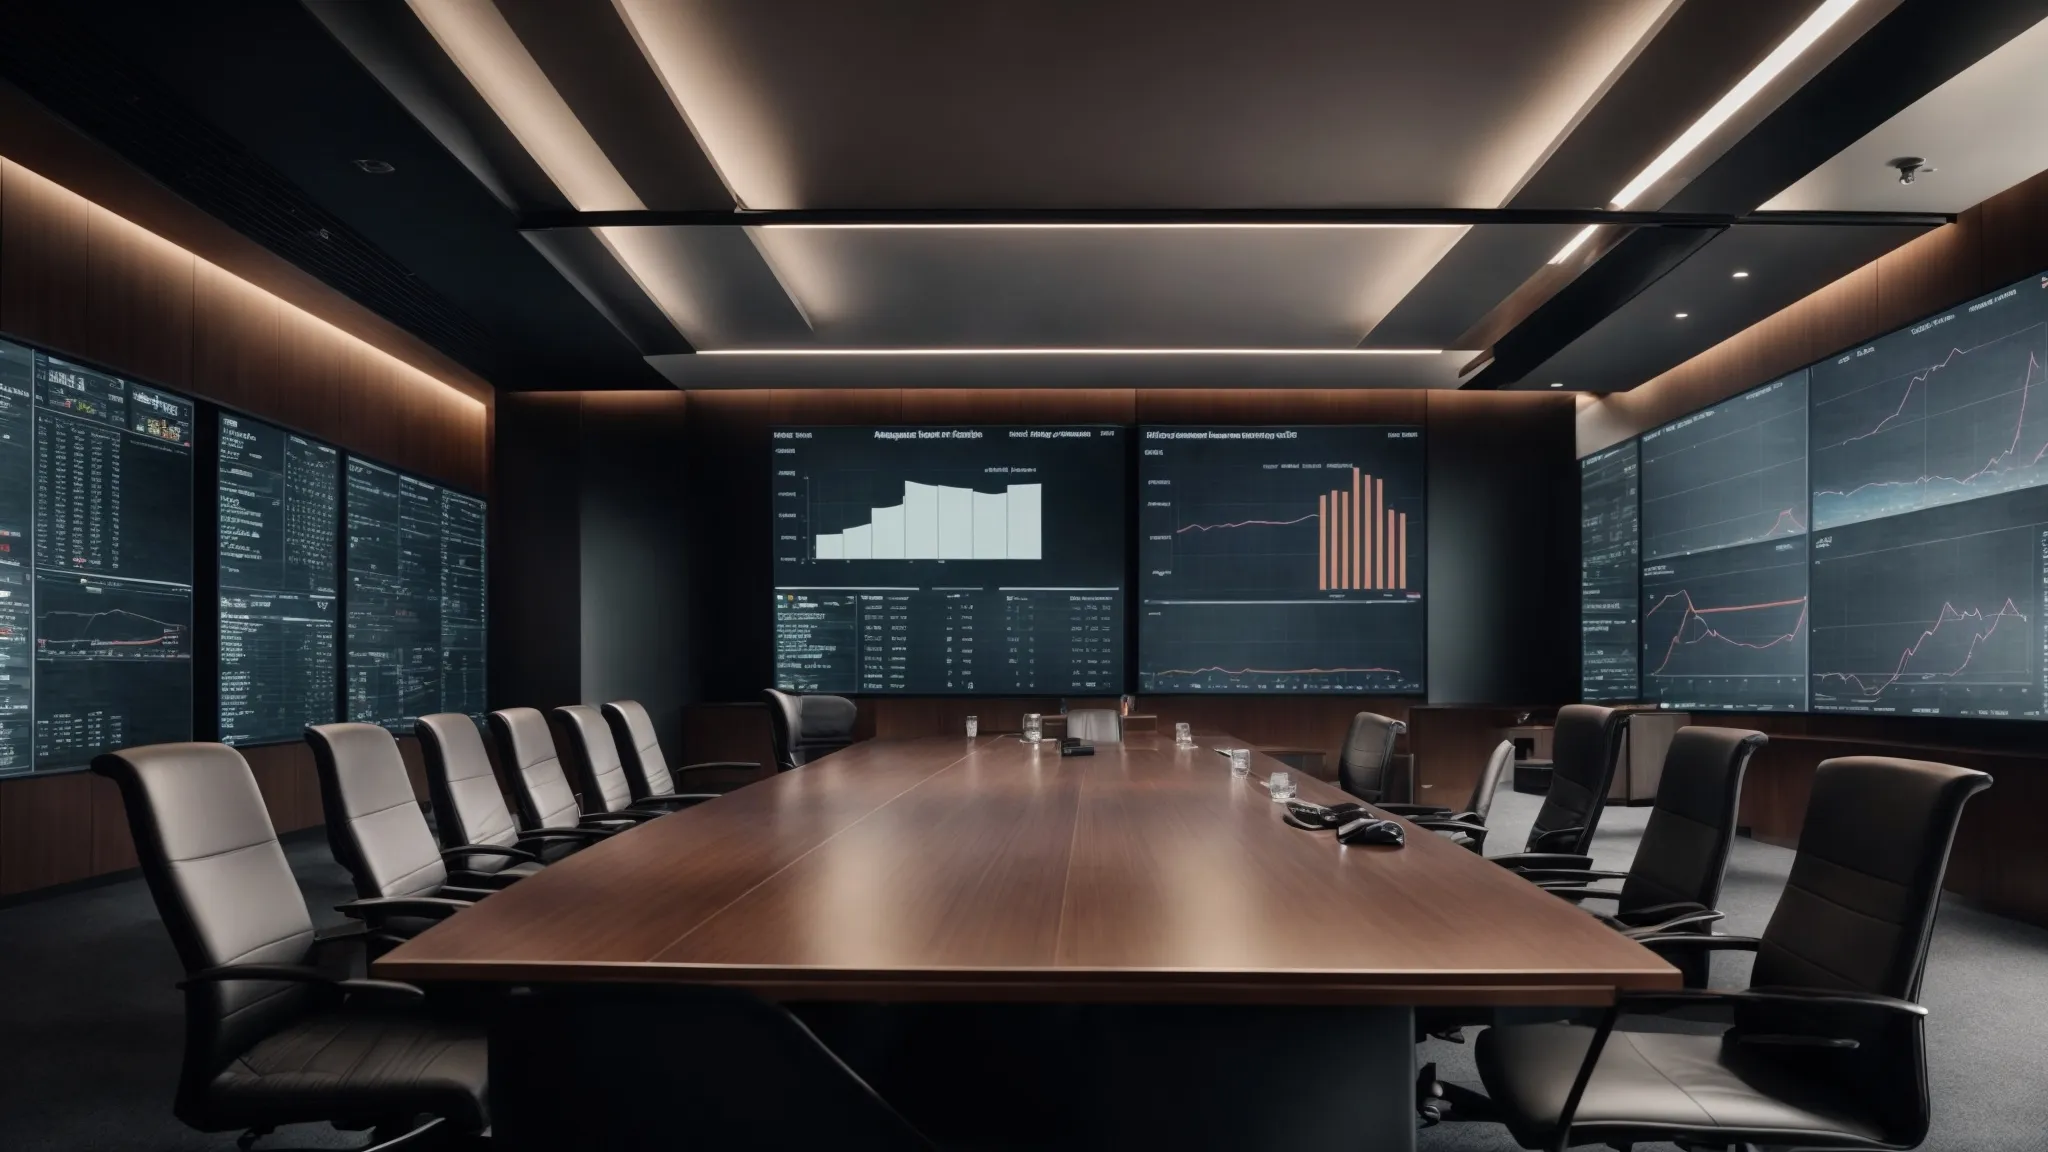 a conference room with a large screen displaying graphs and data analytics related to consumer behavior.